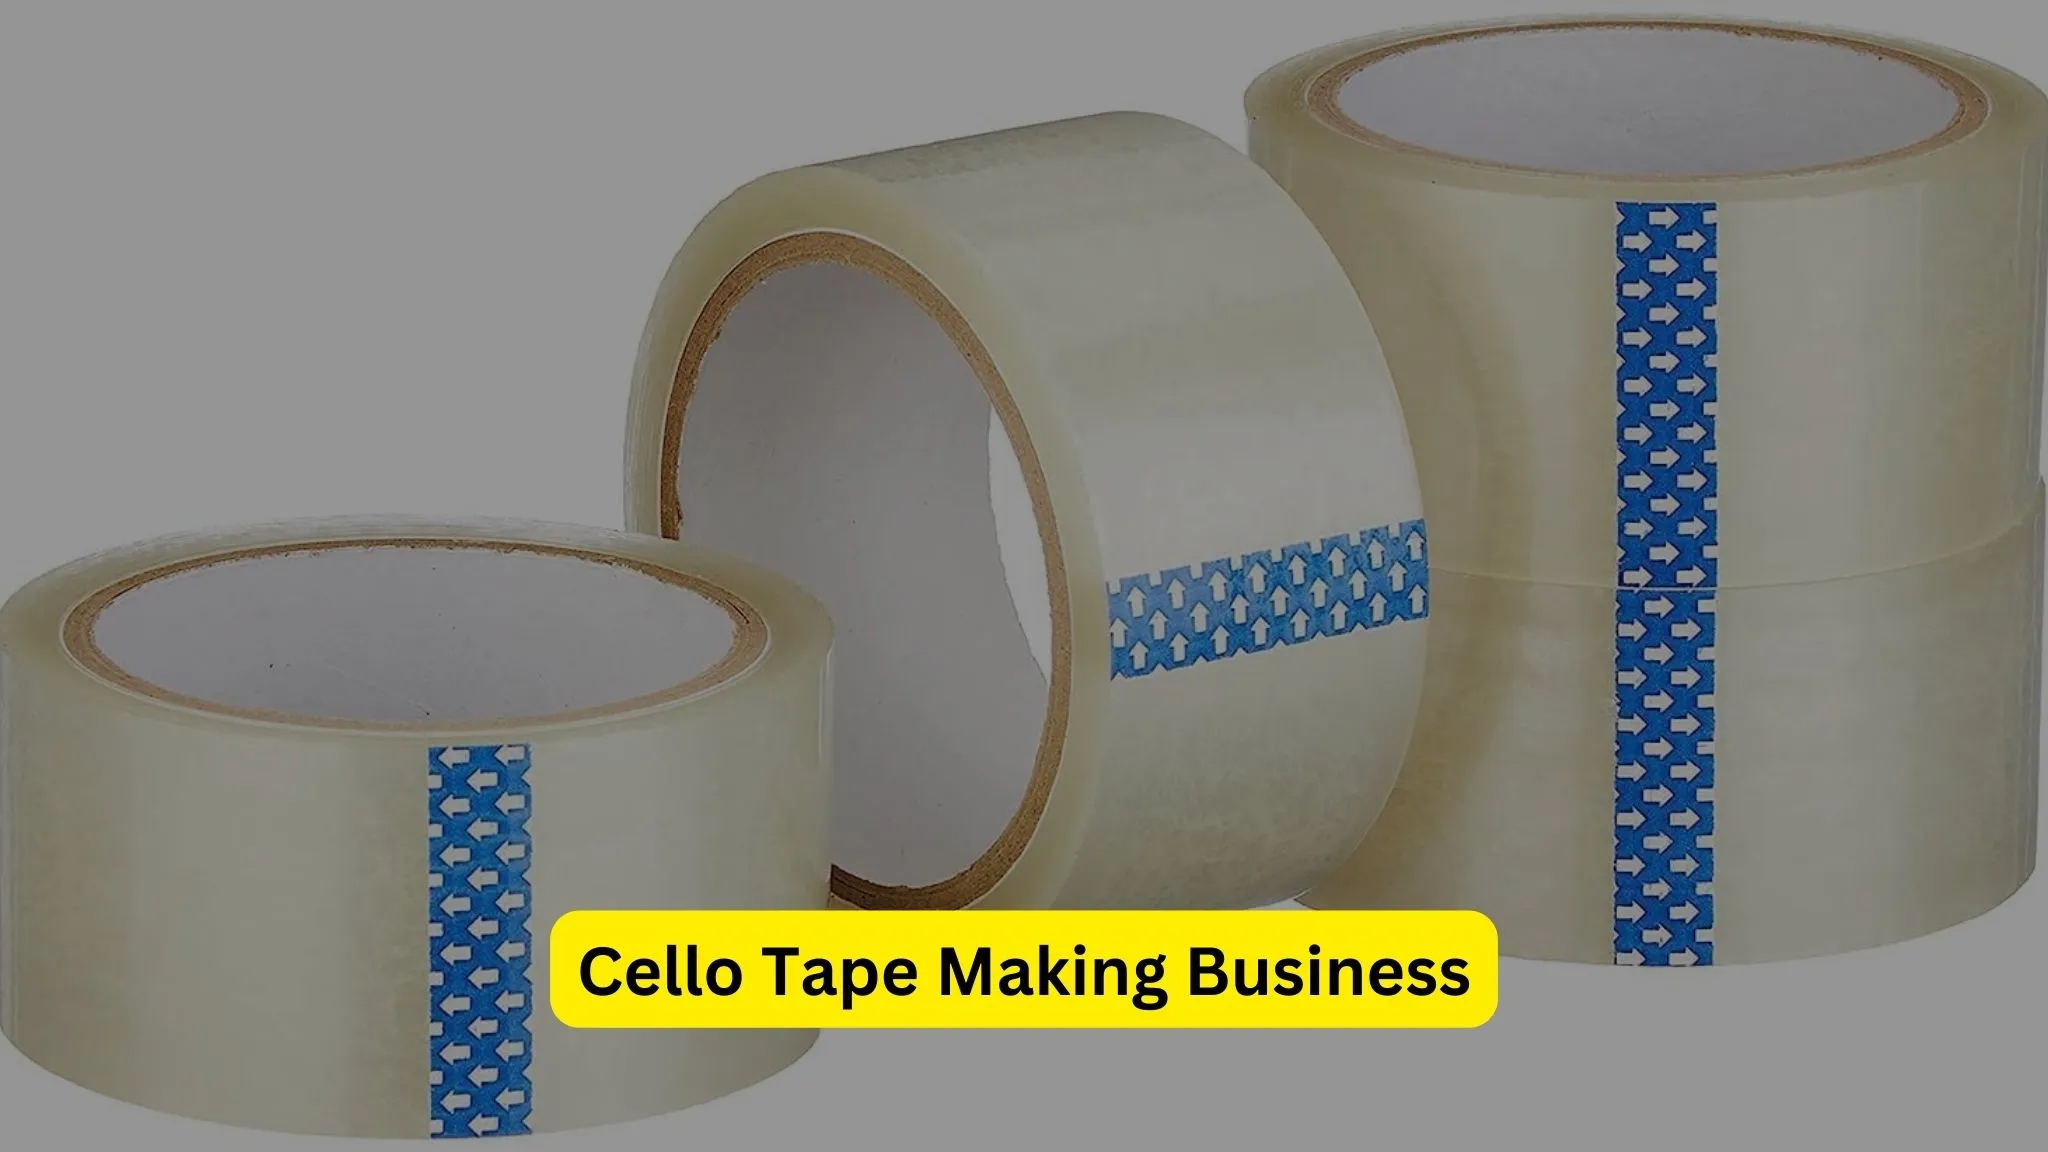 Cello Tape Making Business